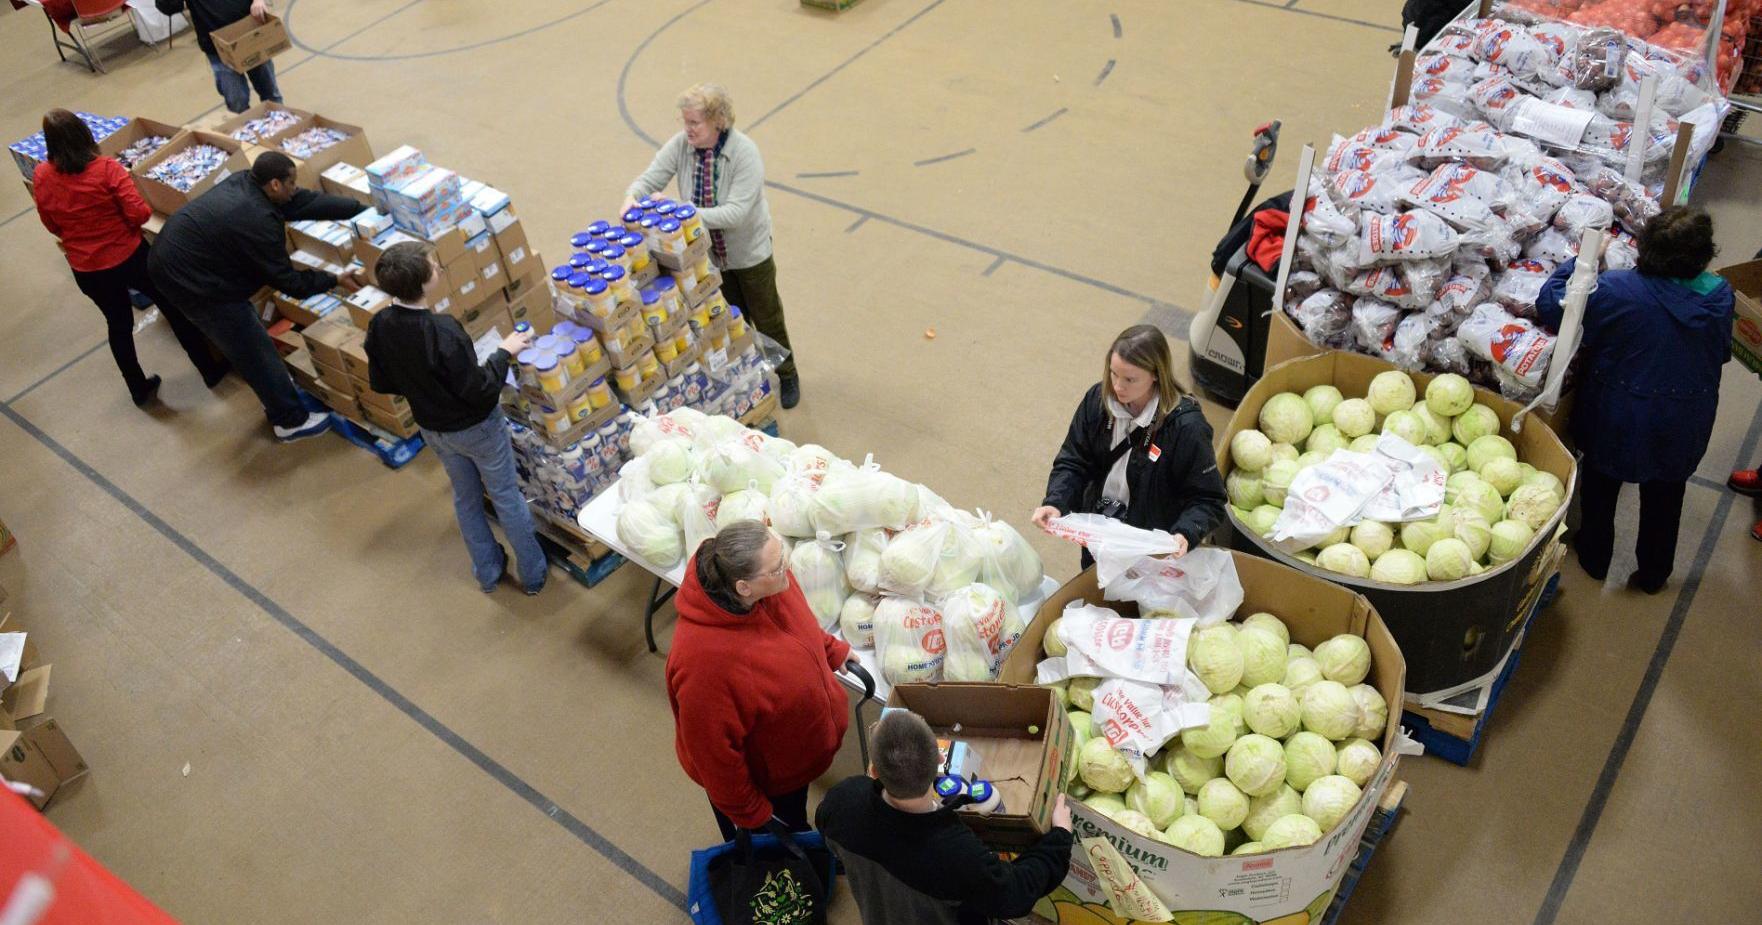 Eastern Illinois Foodbank plans giveaways in Normal, Farmer City